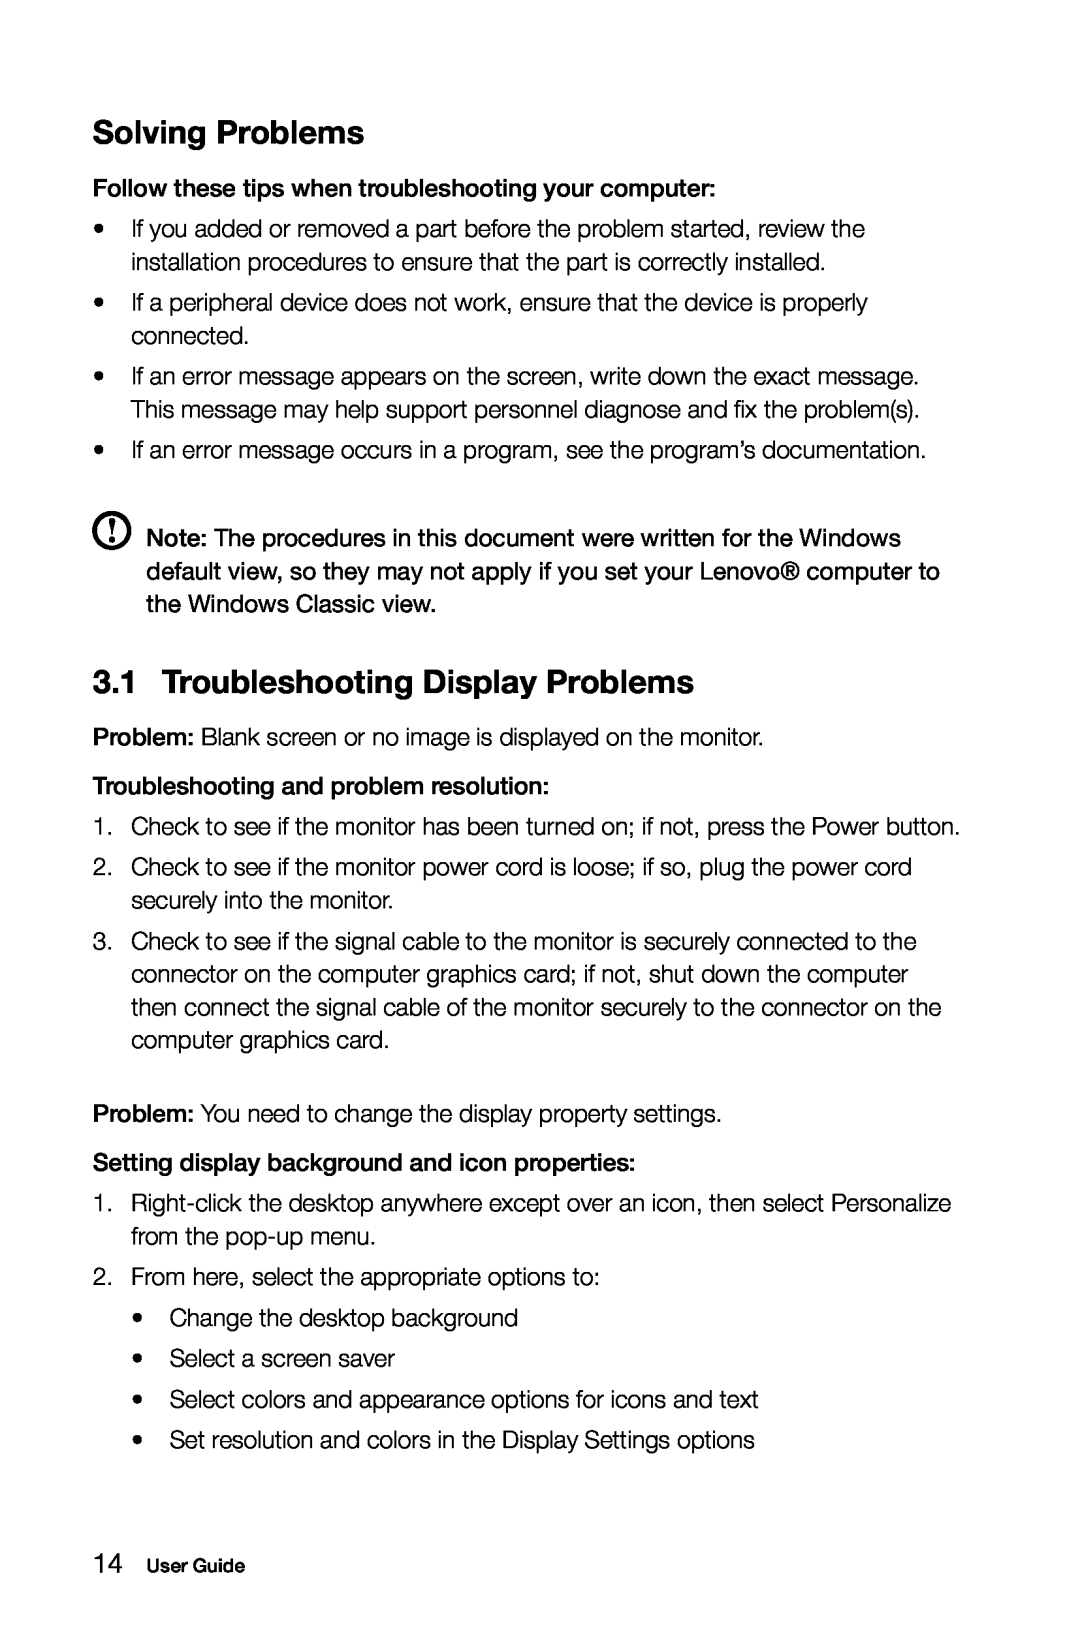 Lenovo H5S manual Solving Problems, Troubleshooting Display Problems 